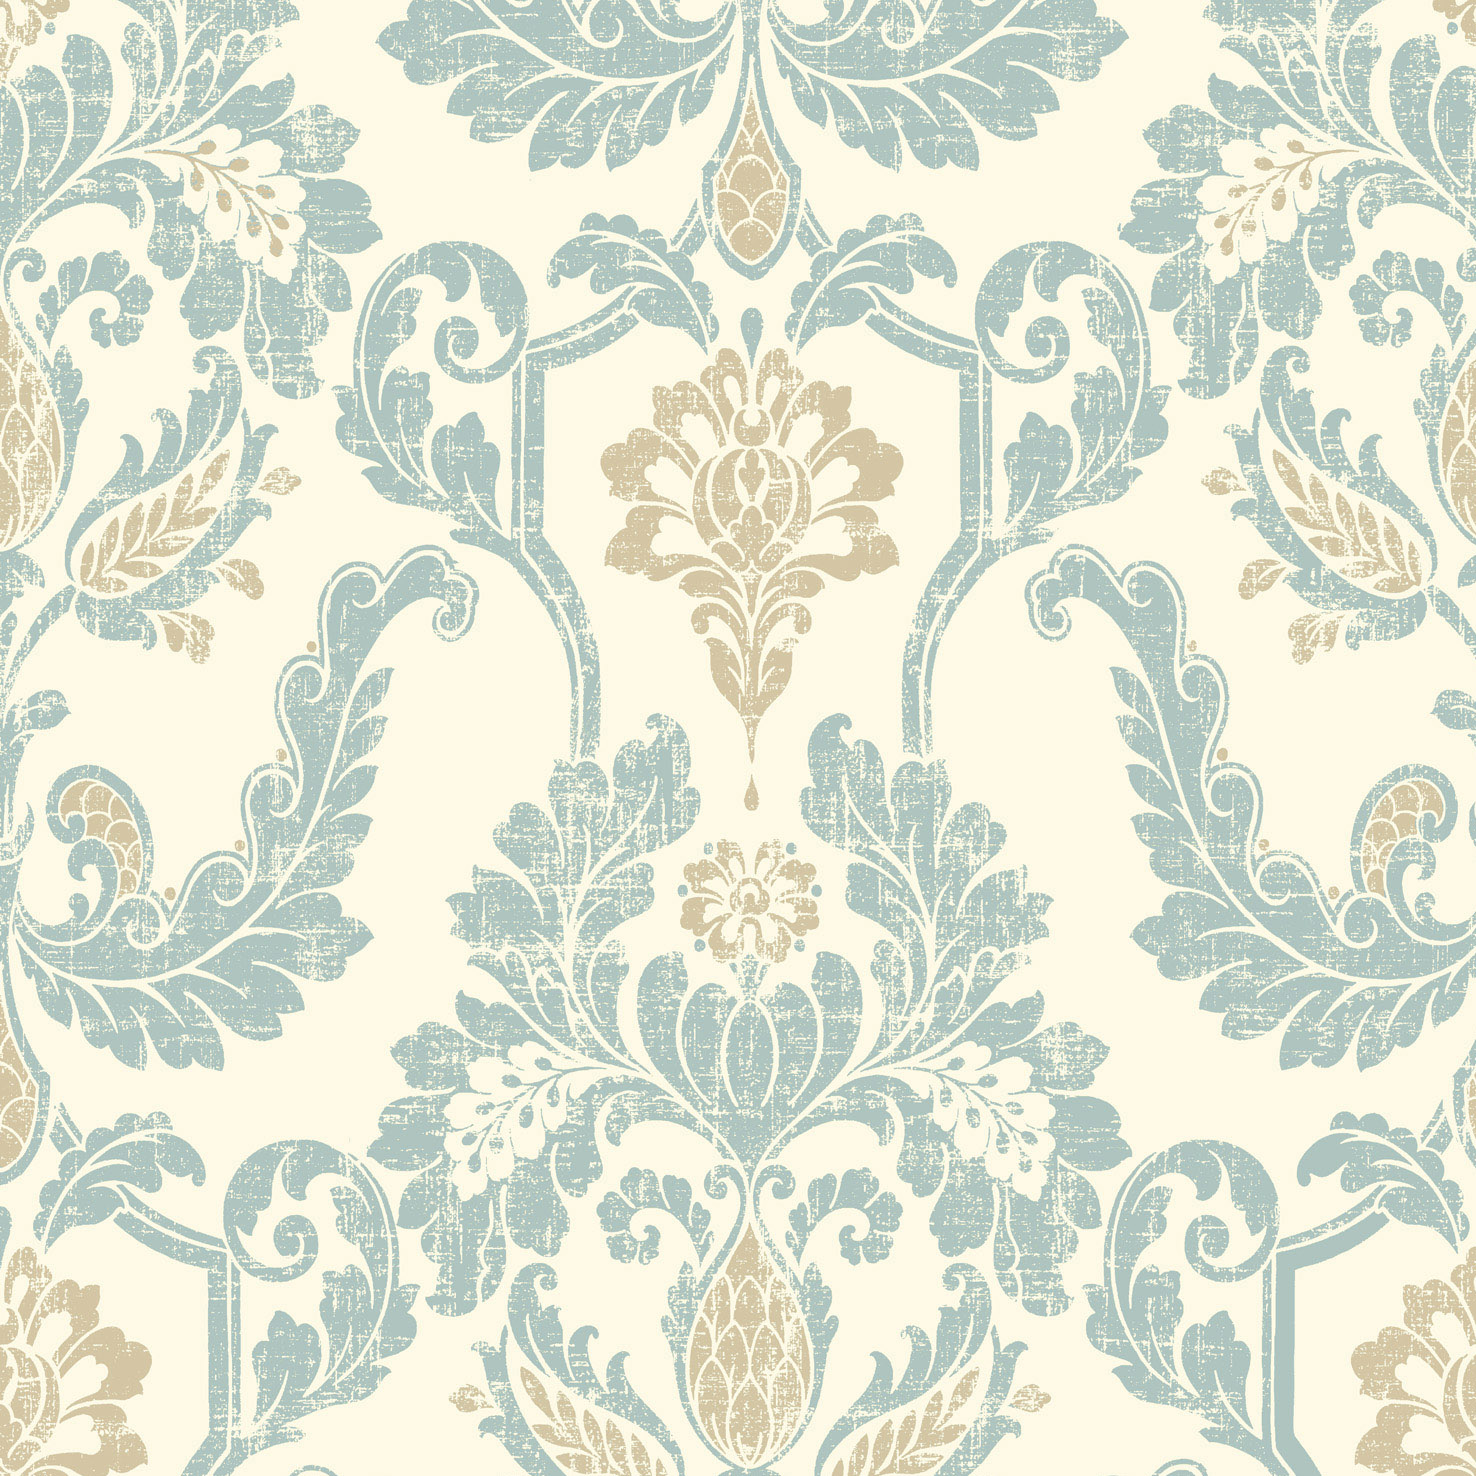 Damask With Soft Blue And Gold Textured Prints On A Cream Ground